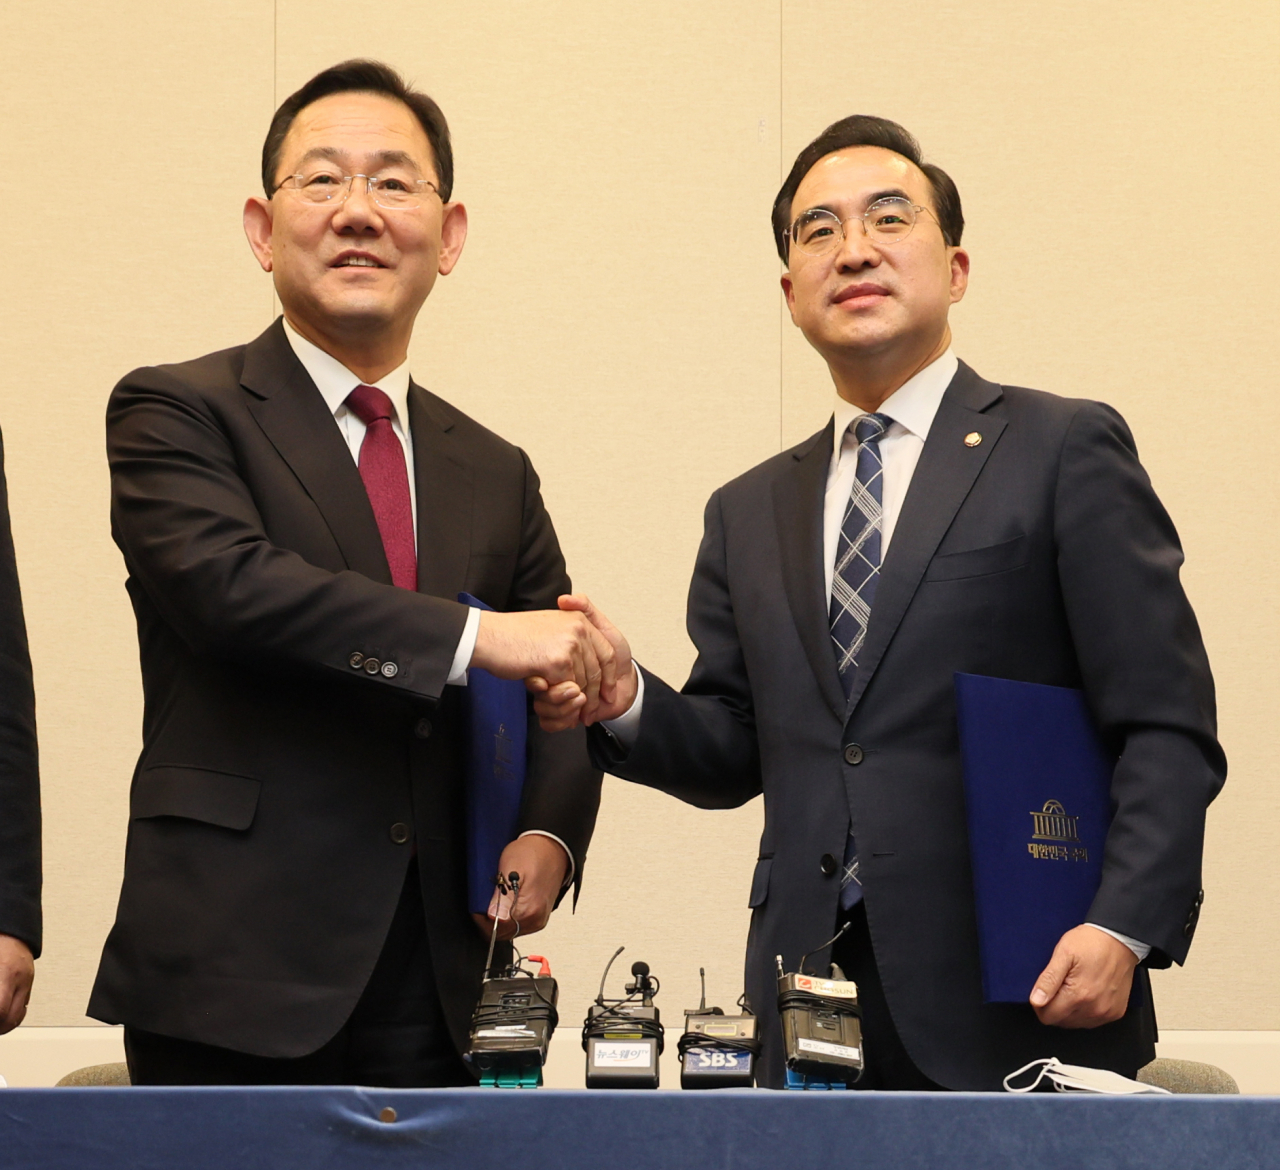 Rep. Joo Ho-young (left), the floor leader of the ruling People Power Party, and his main opposition Democratic Party counterpart Rep. Park Hong-keun shake hands after announcing the content of their agreement on a parliamentary probe into the Itaewon tragedy during a press conference held at the National Assembly in Seoul, Wednesday. (Yonhap)